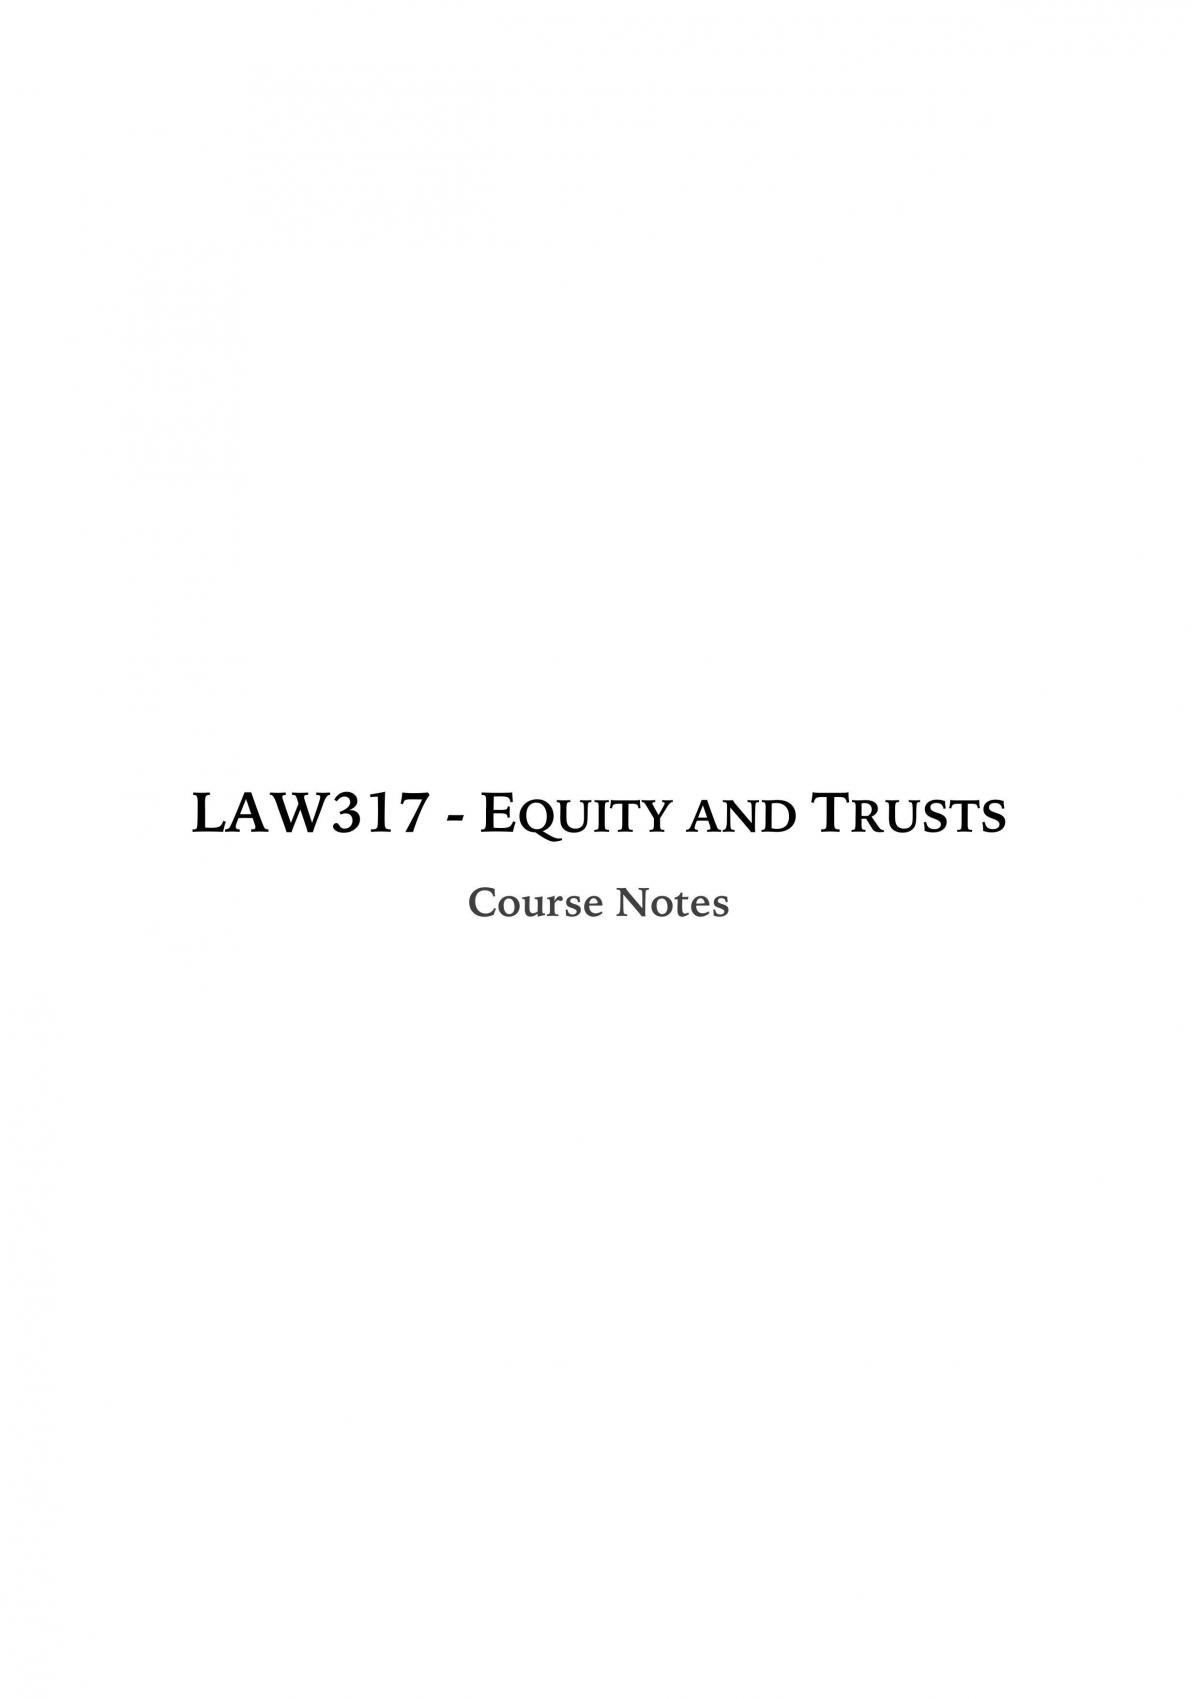 Comprehensive Lecture and Tutorial Notes for Equity and Trusts - Page 1